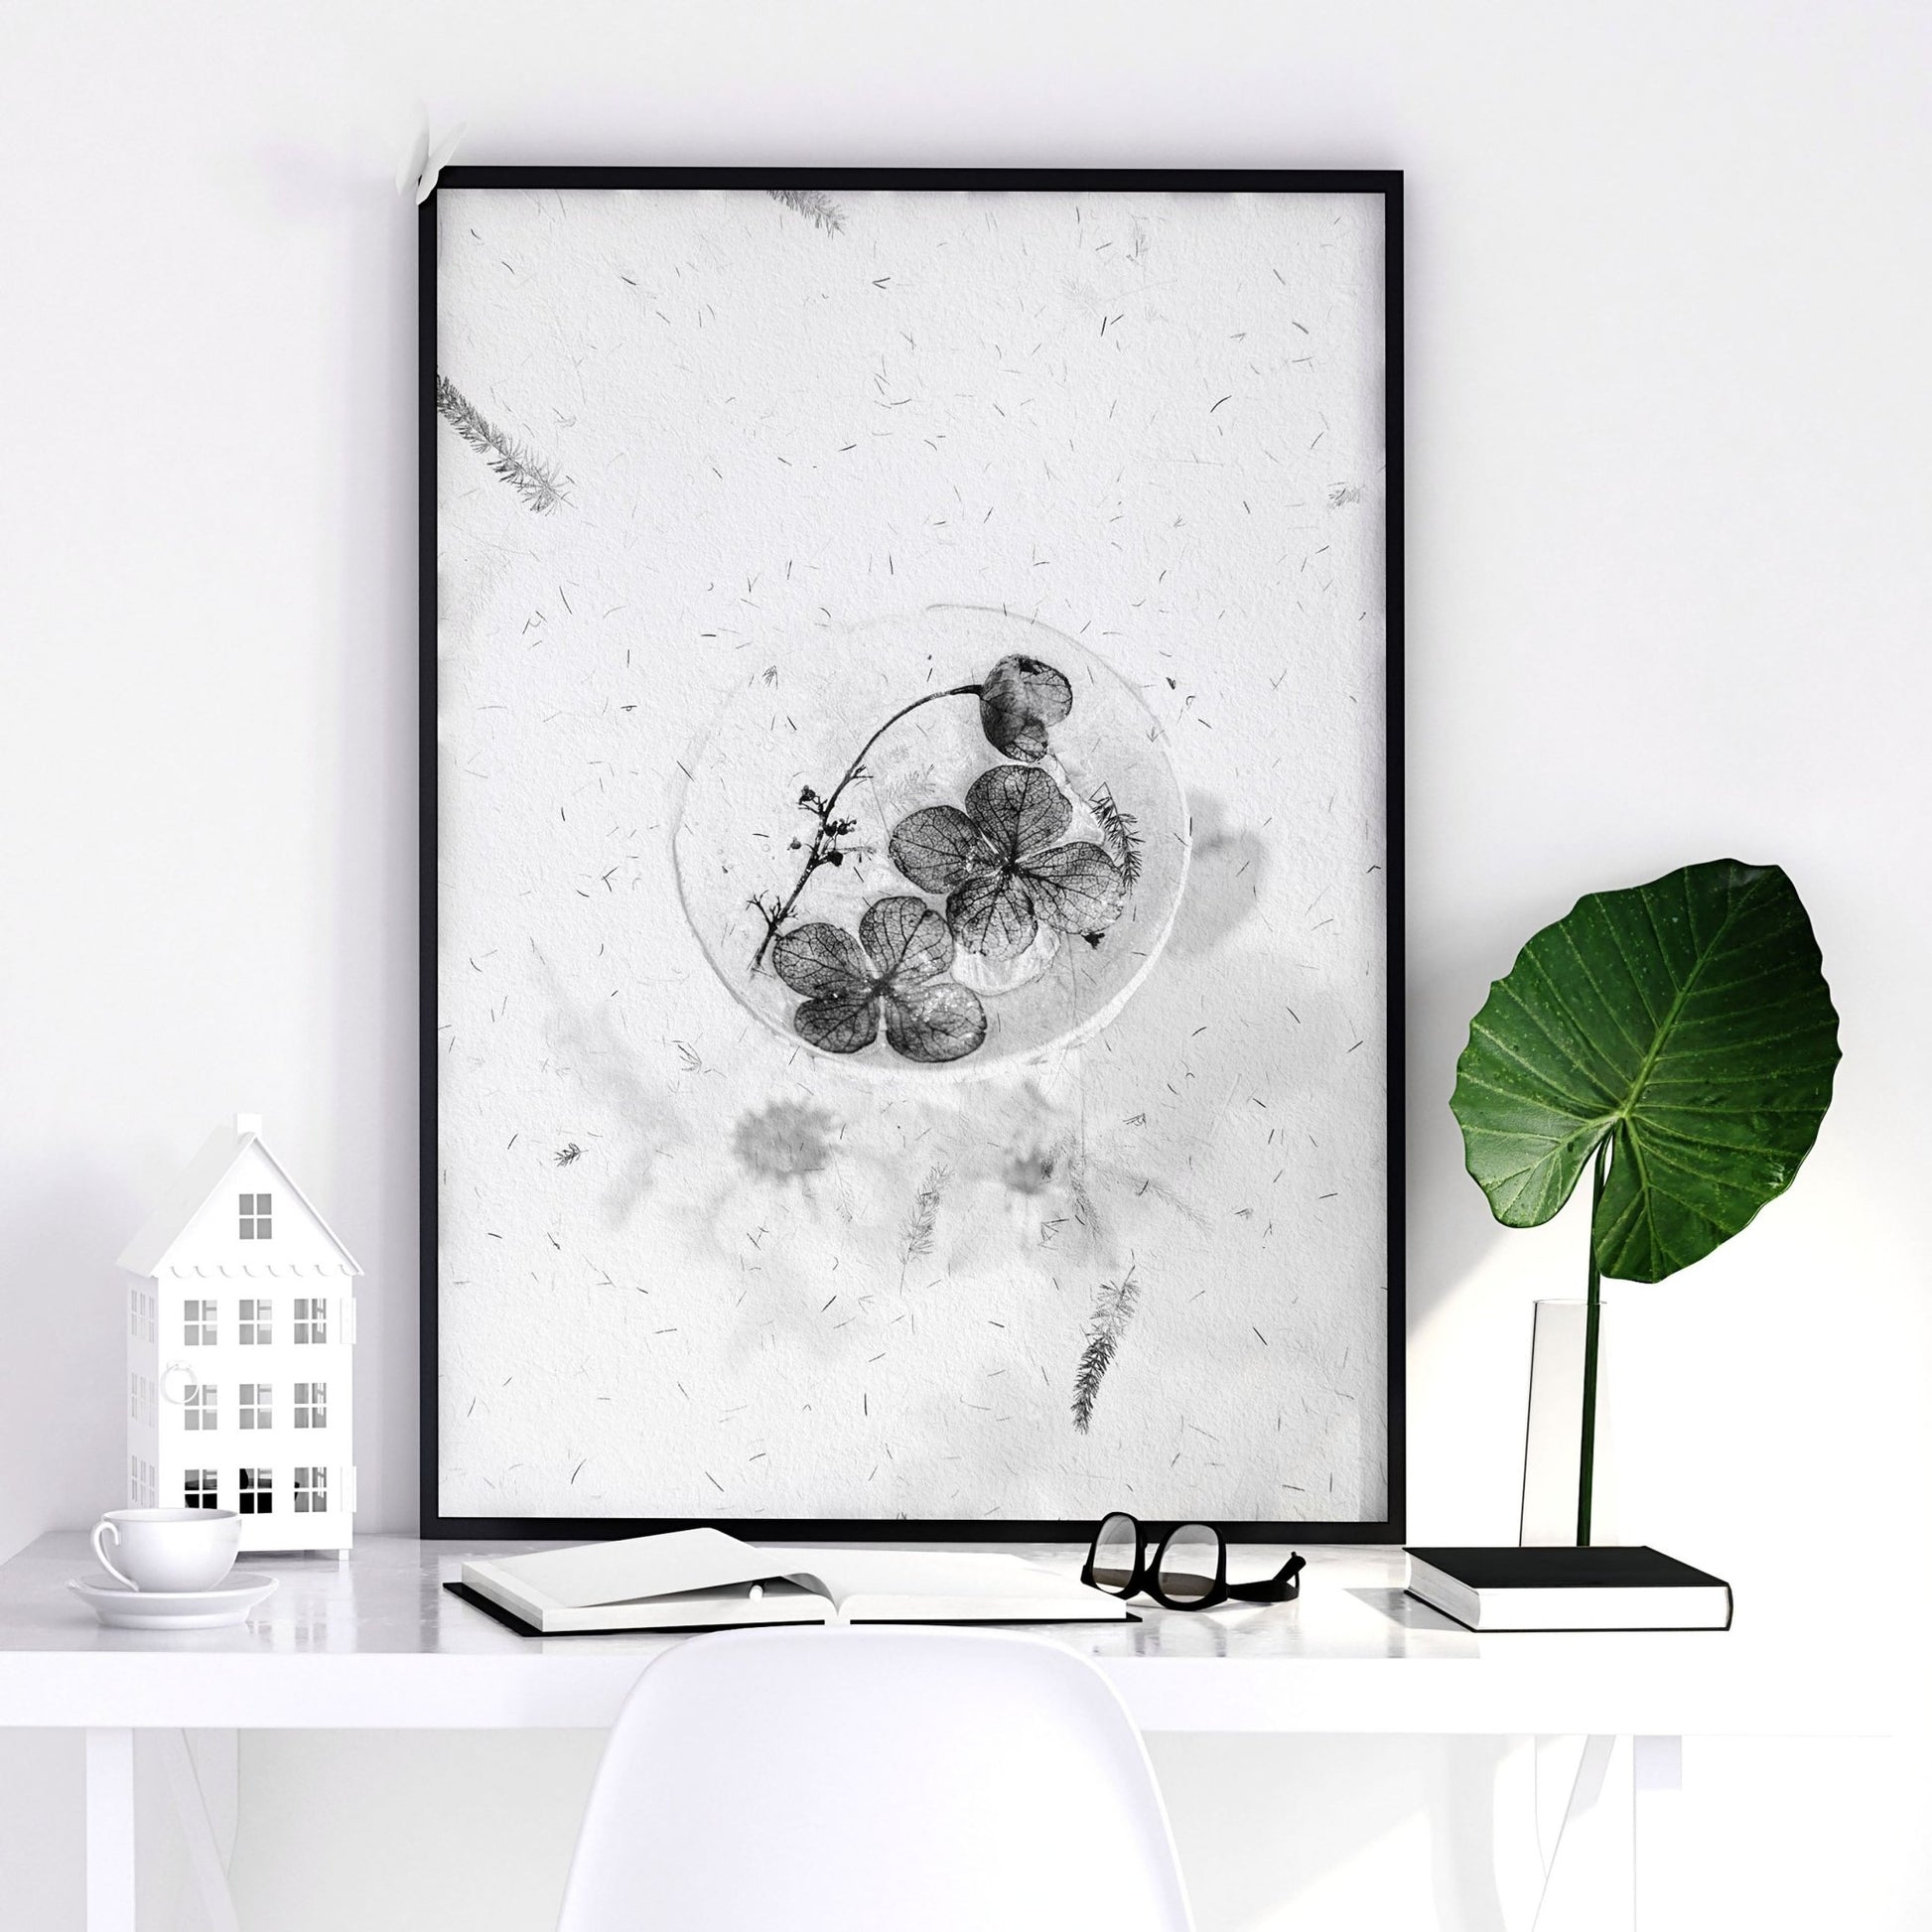 White and black wall art | set of 3 prints - About Wall Art